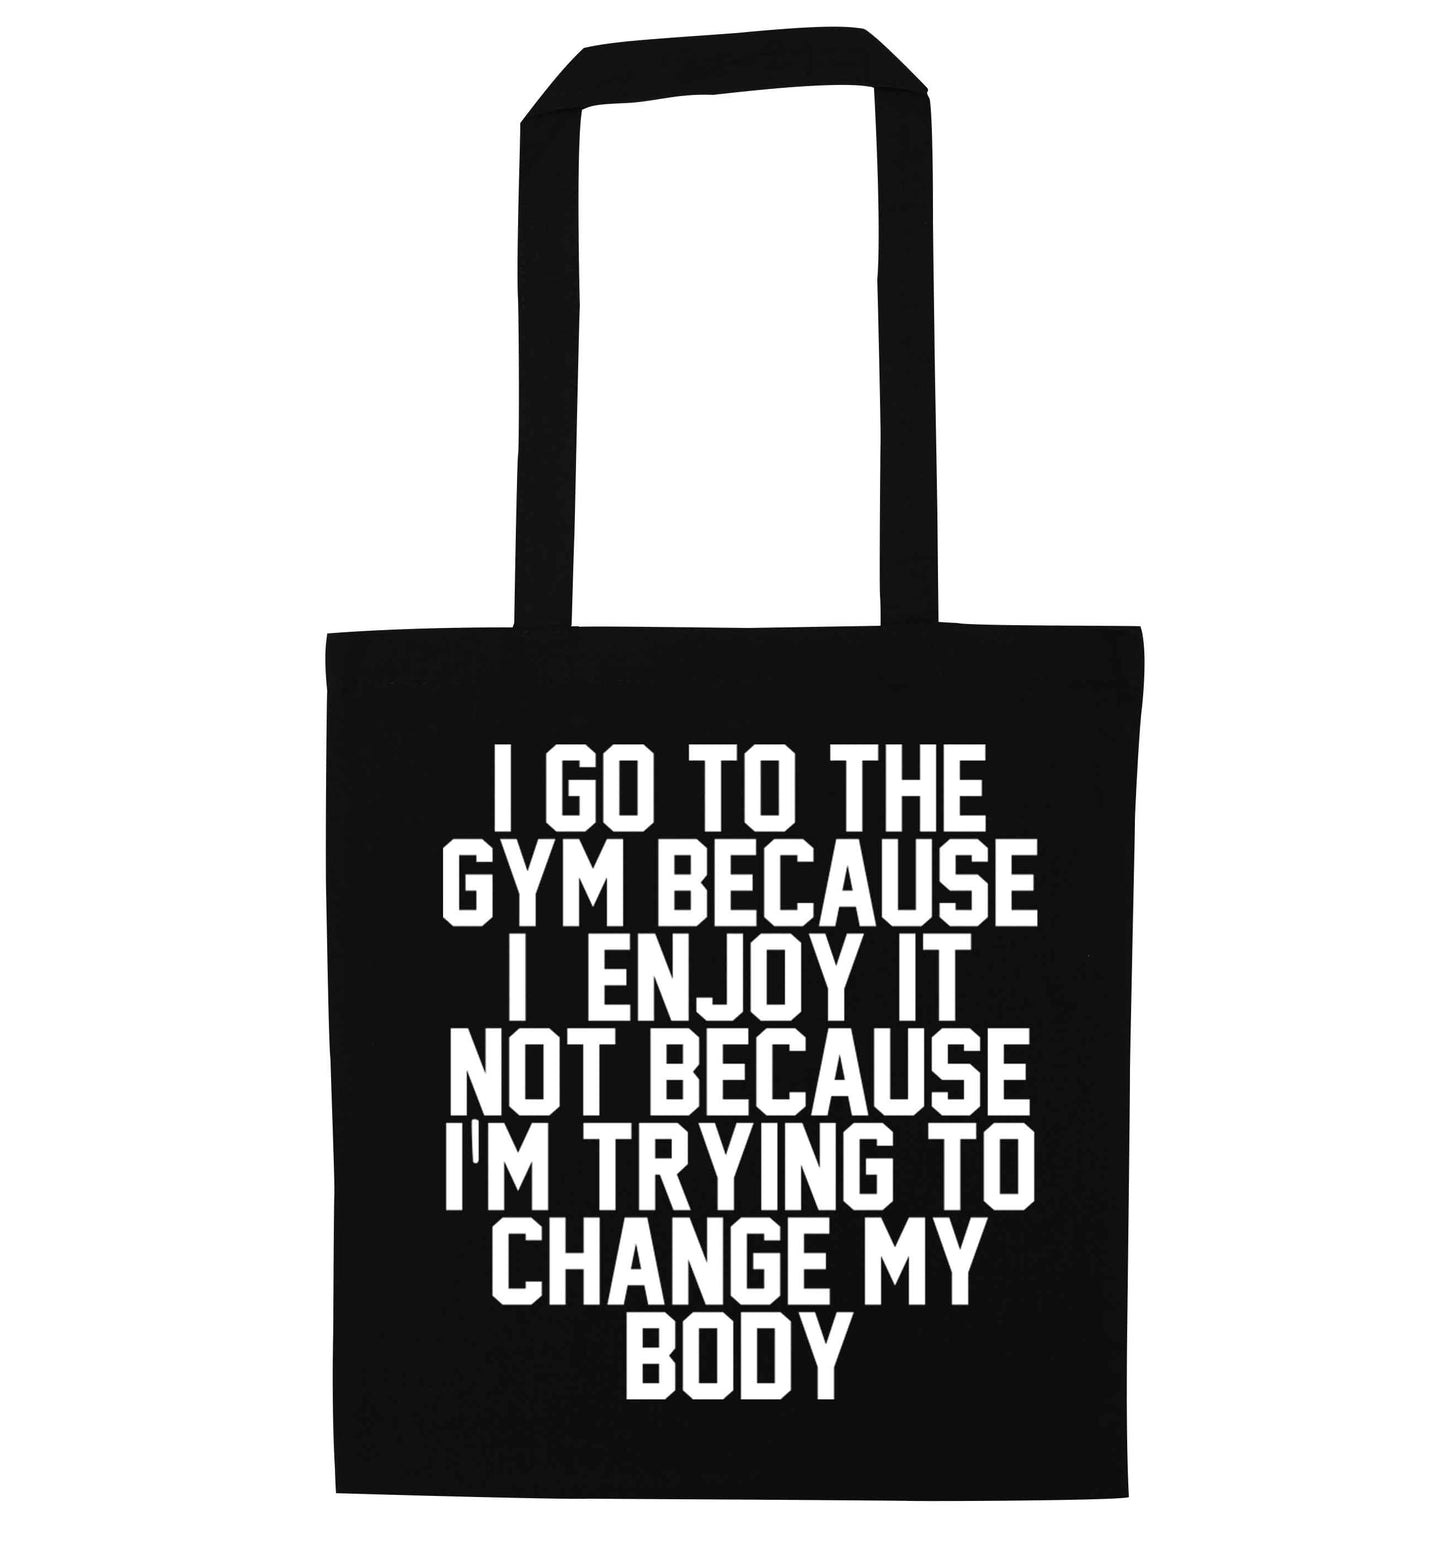 I go to the gym because I enjoy it not because I'm trying to change my body black tote bag